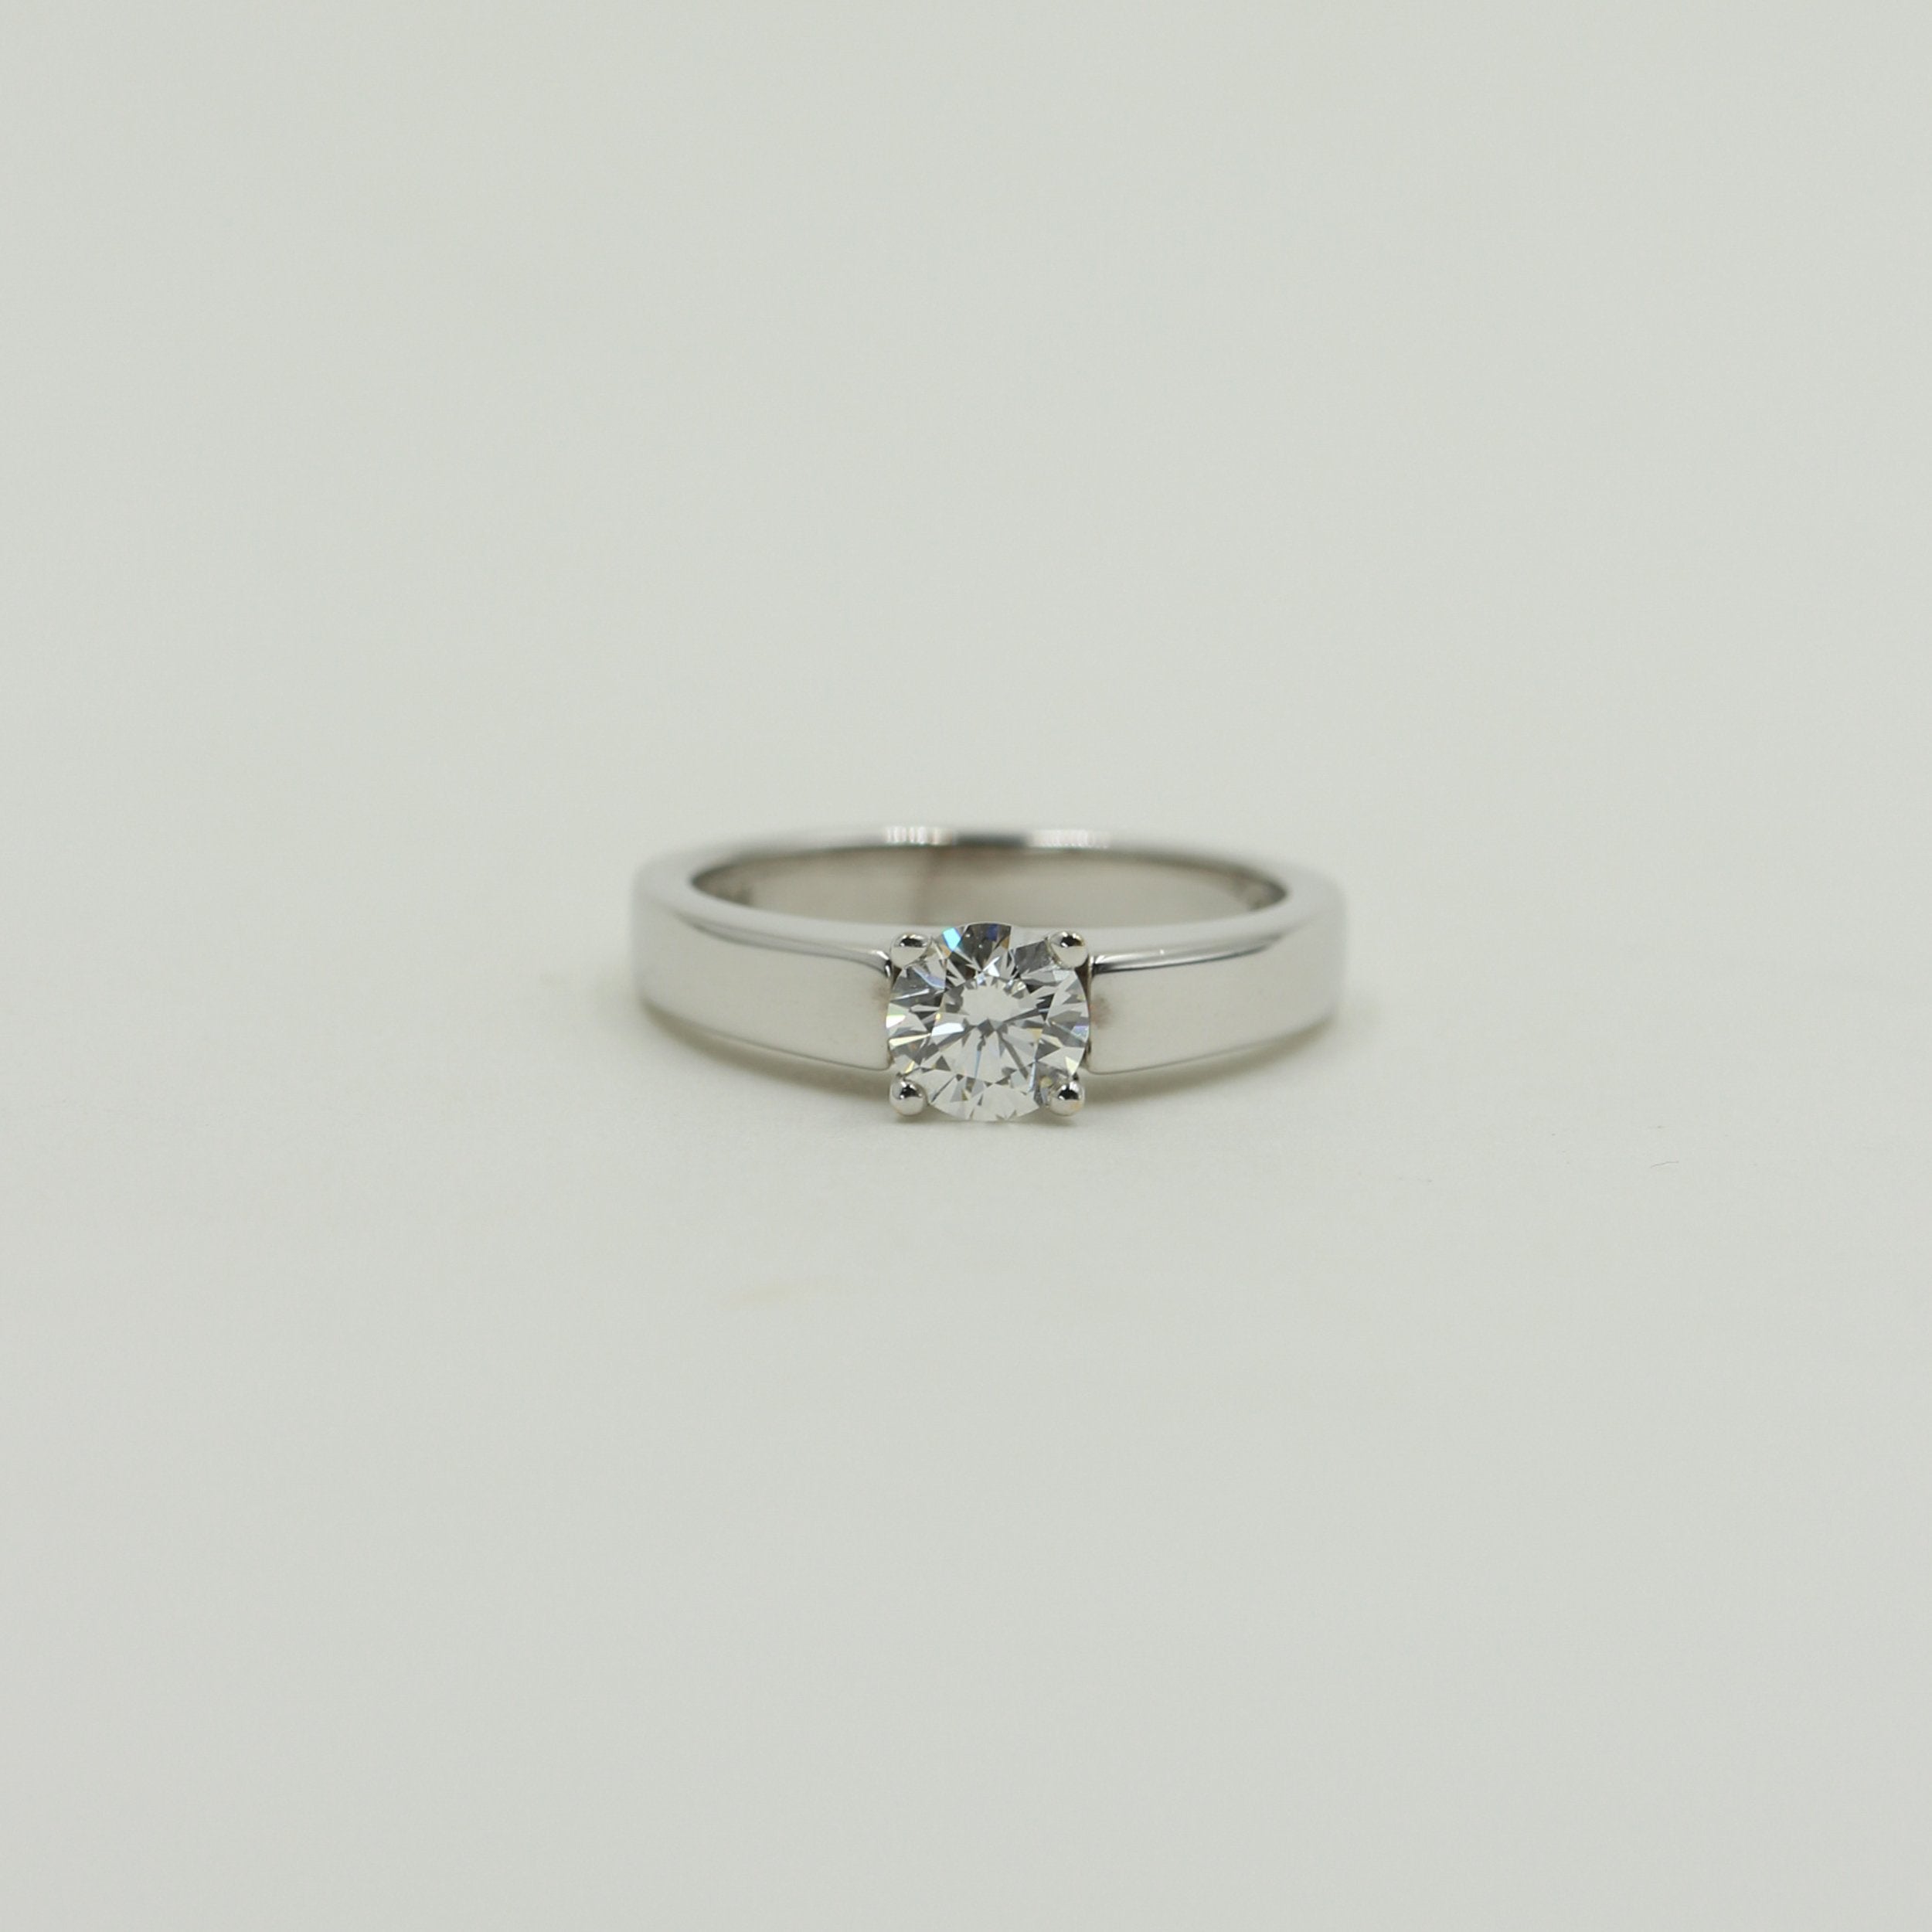 Solitairering m. 0,74 ct. F-SI